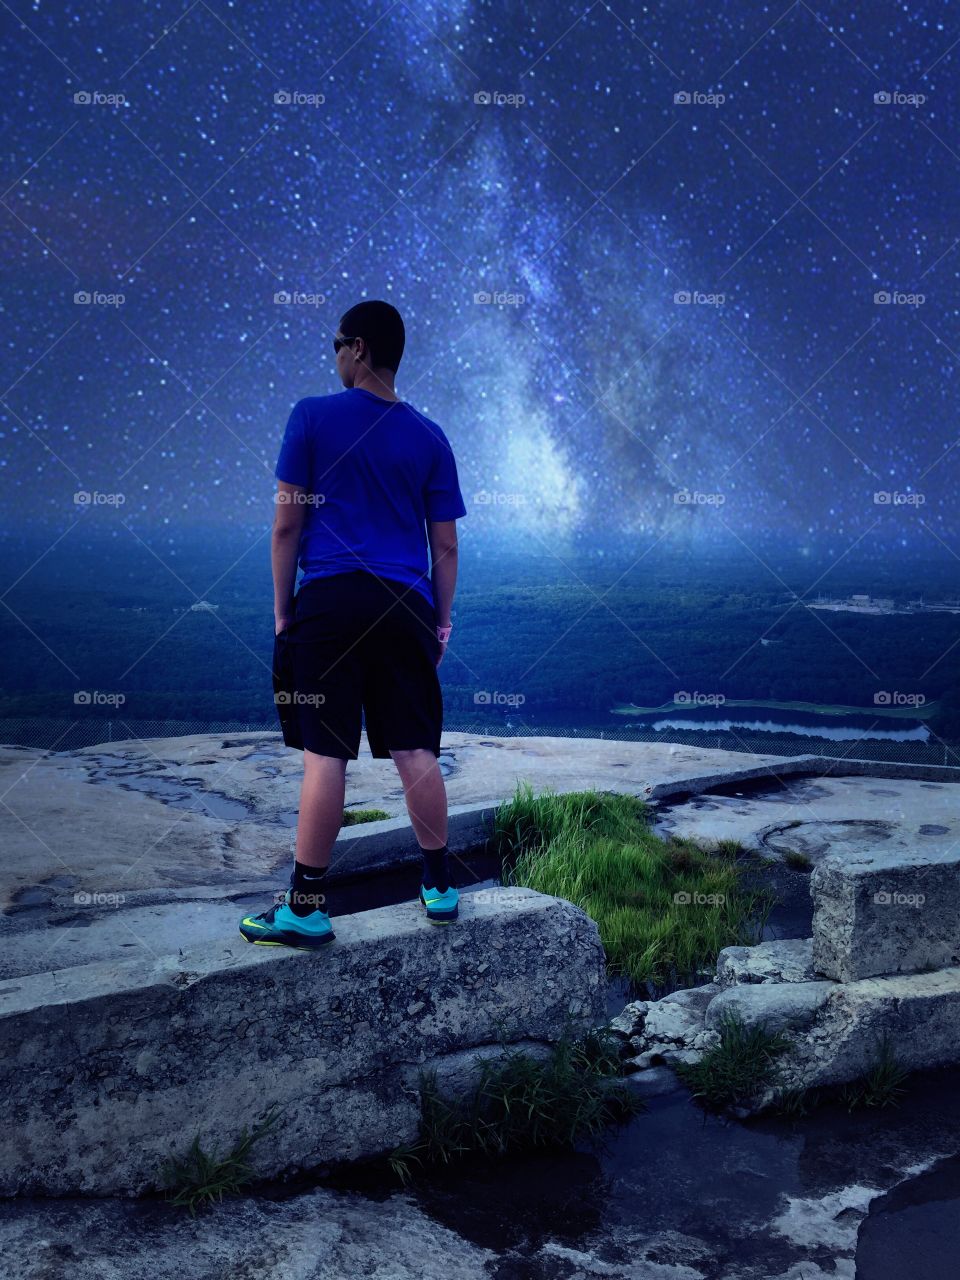 Limitless possibilities in you. Overlooking the top of Stone Mountain Georgia.